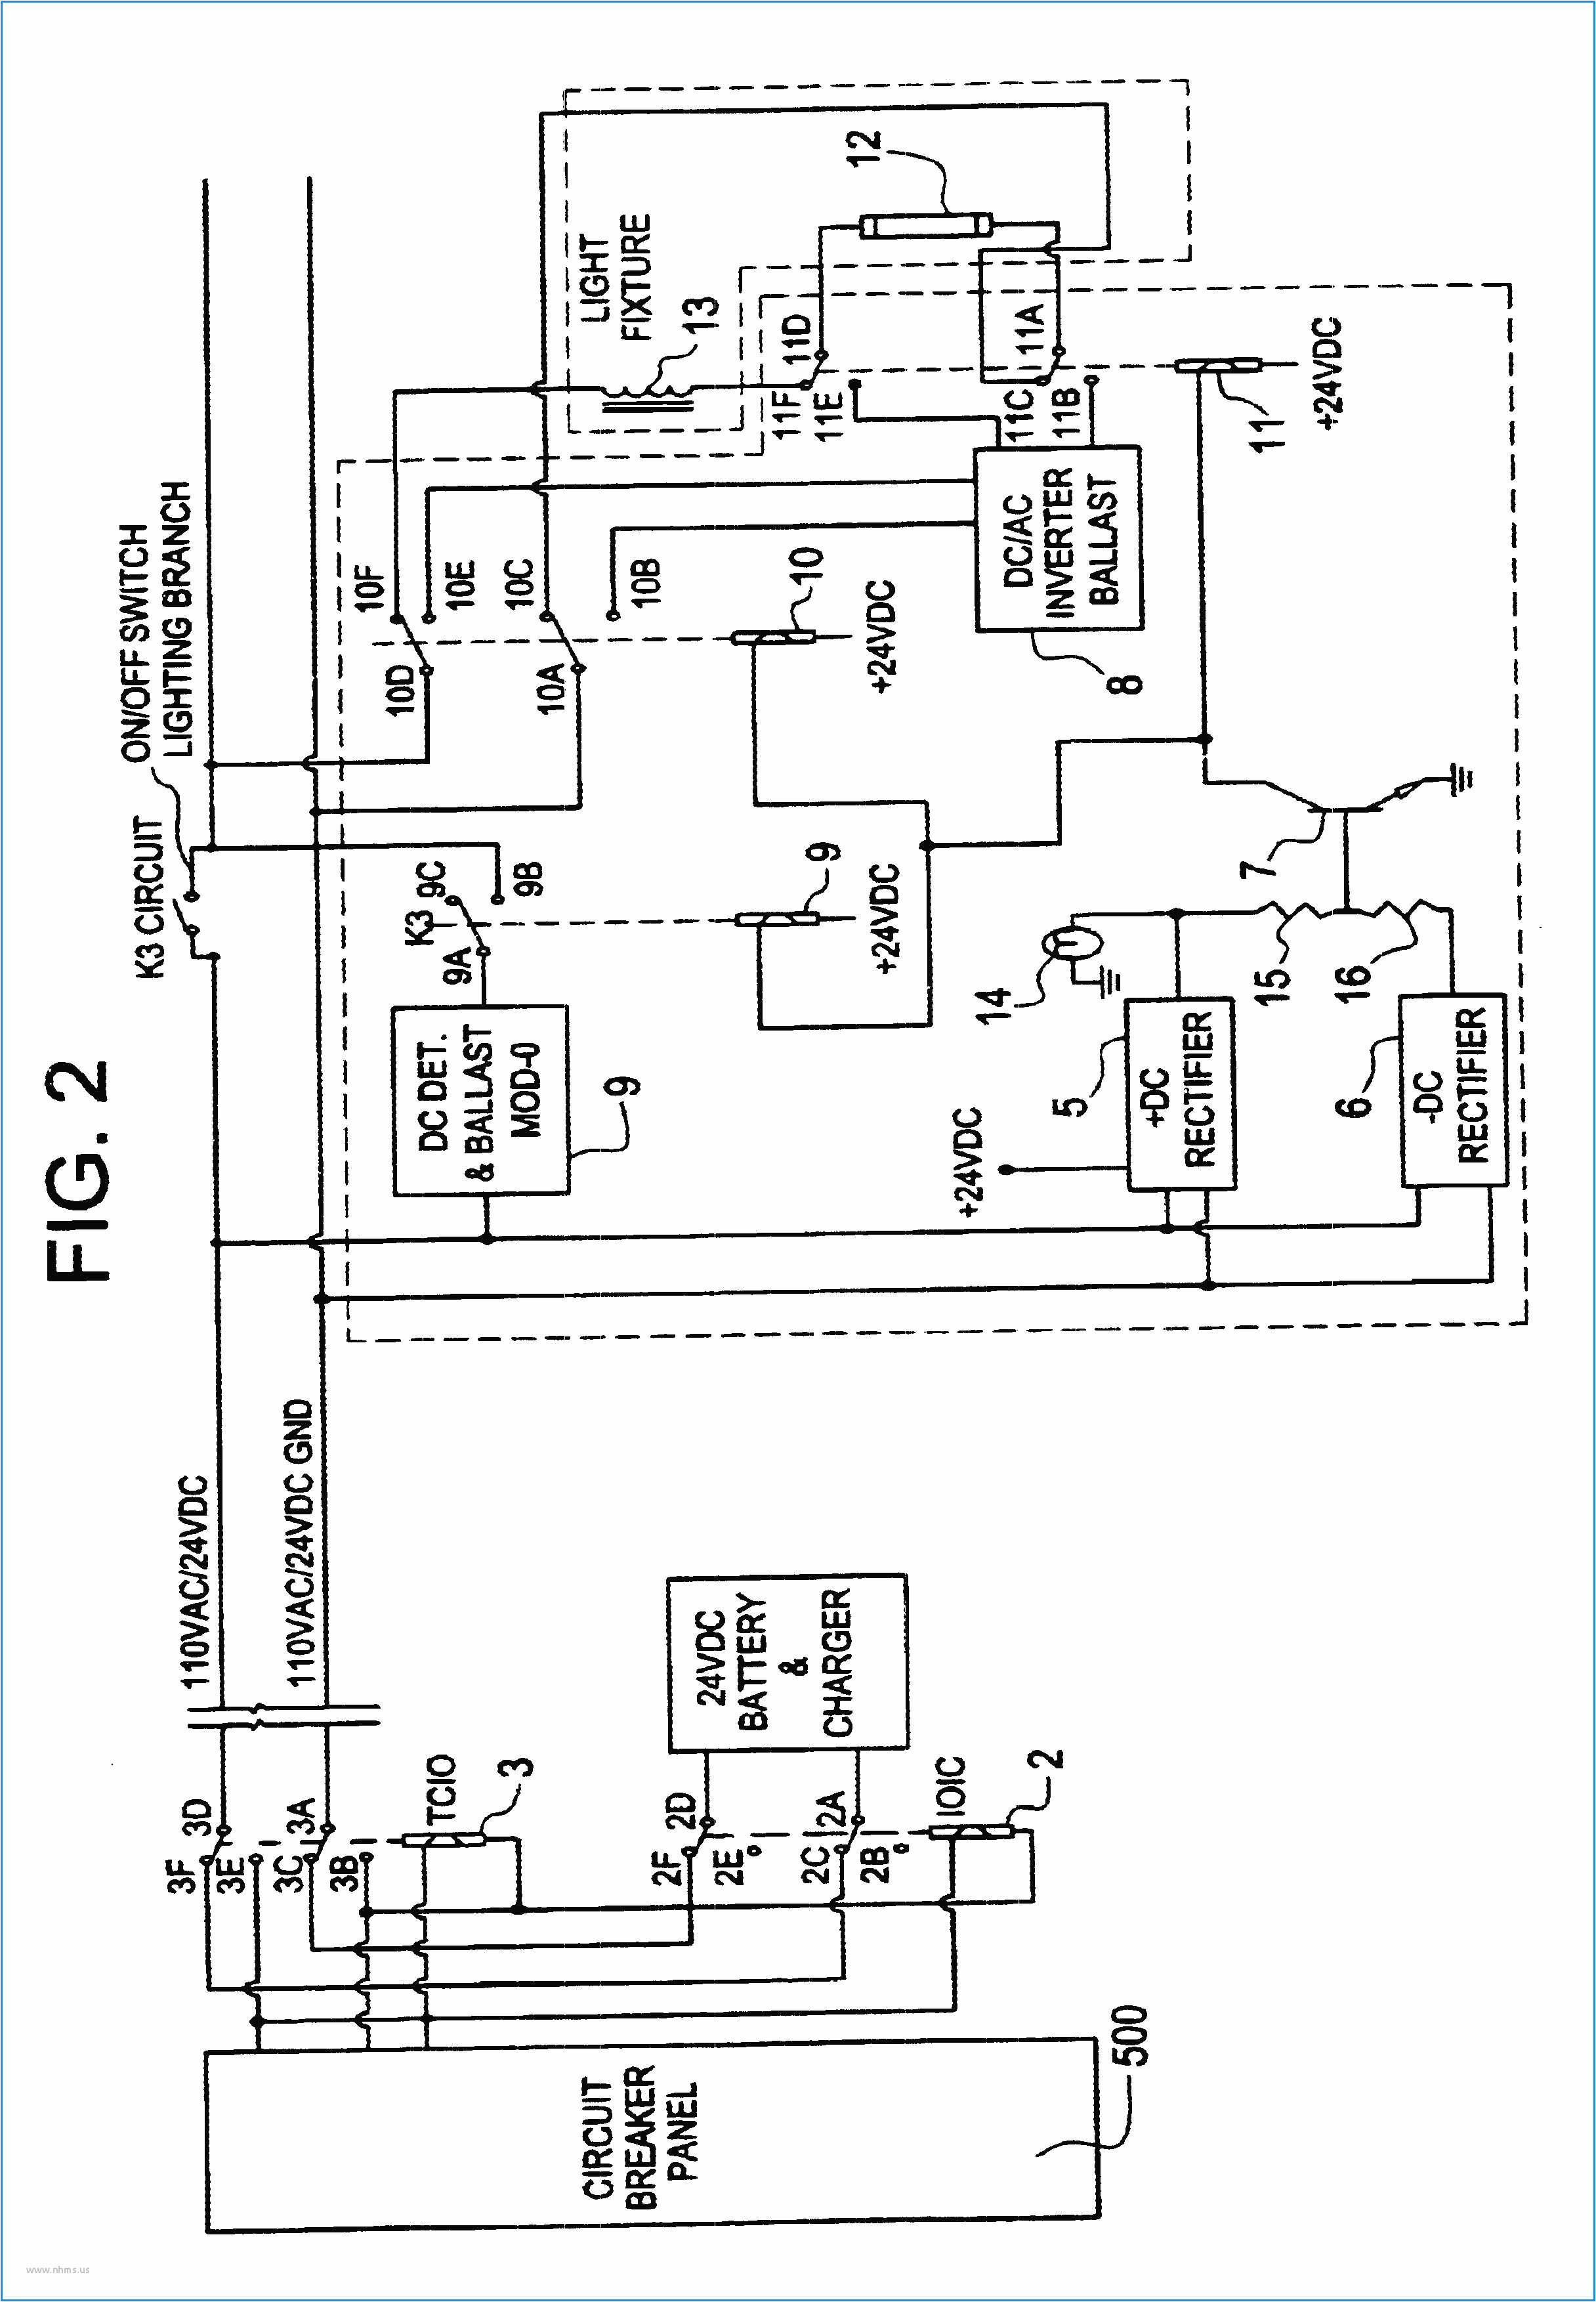 wiring diagram for bodine recessed light wiring diagram database b100 wiring diagram wiring diagram wiring diagram